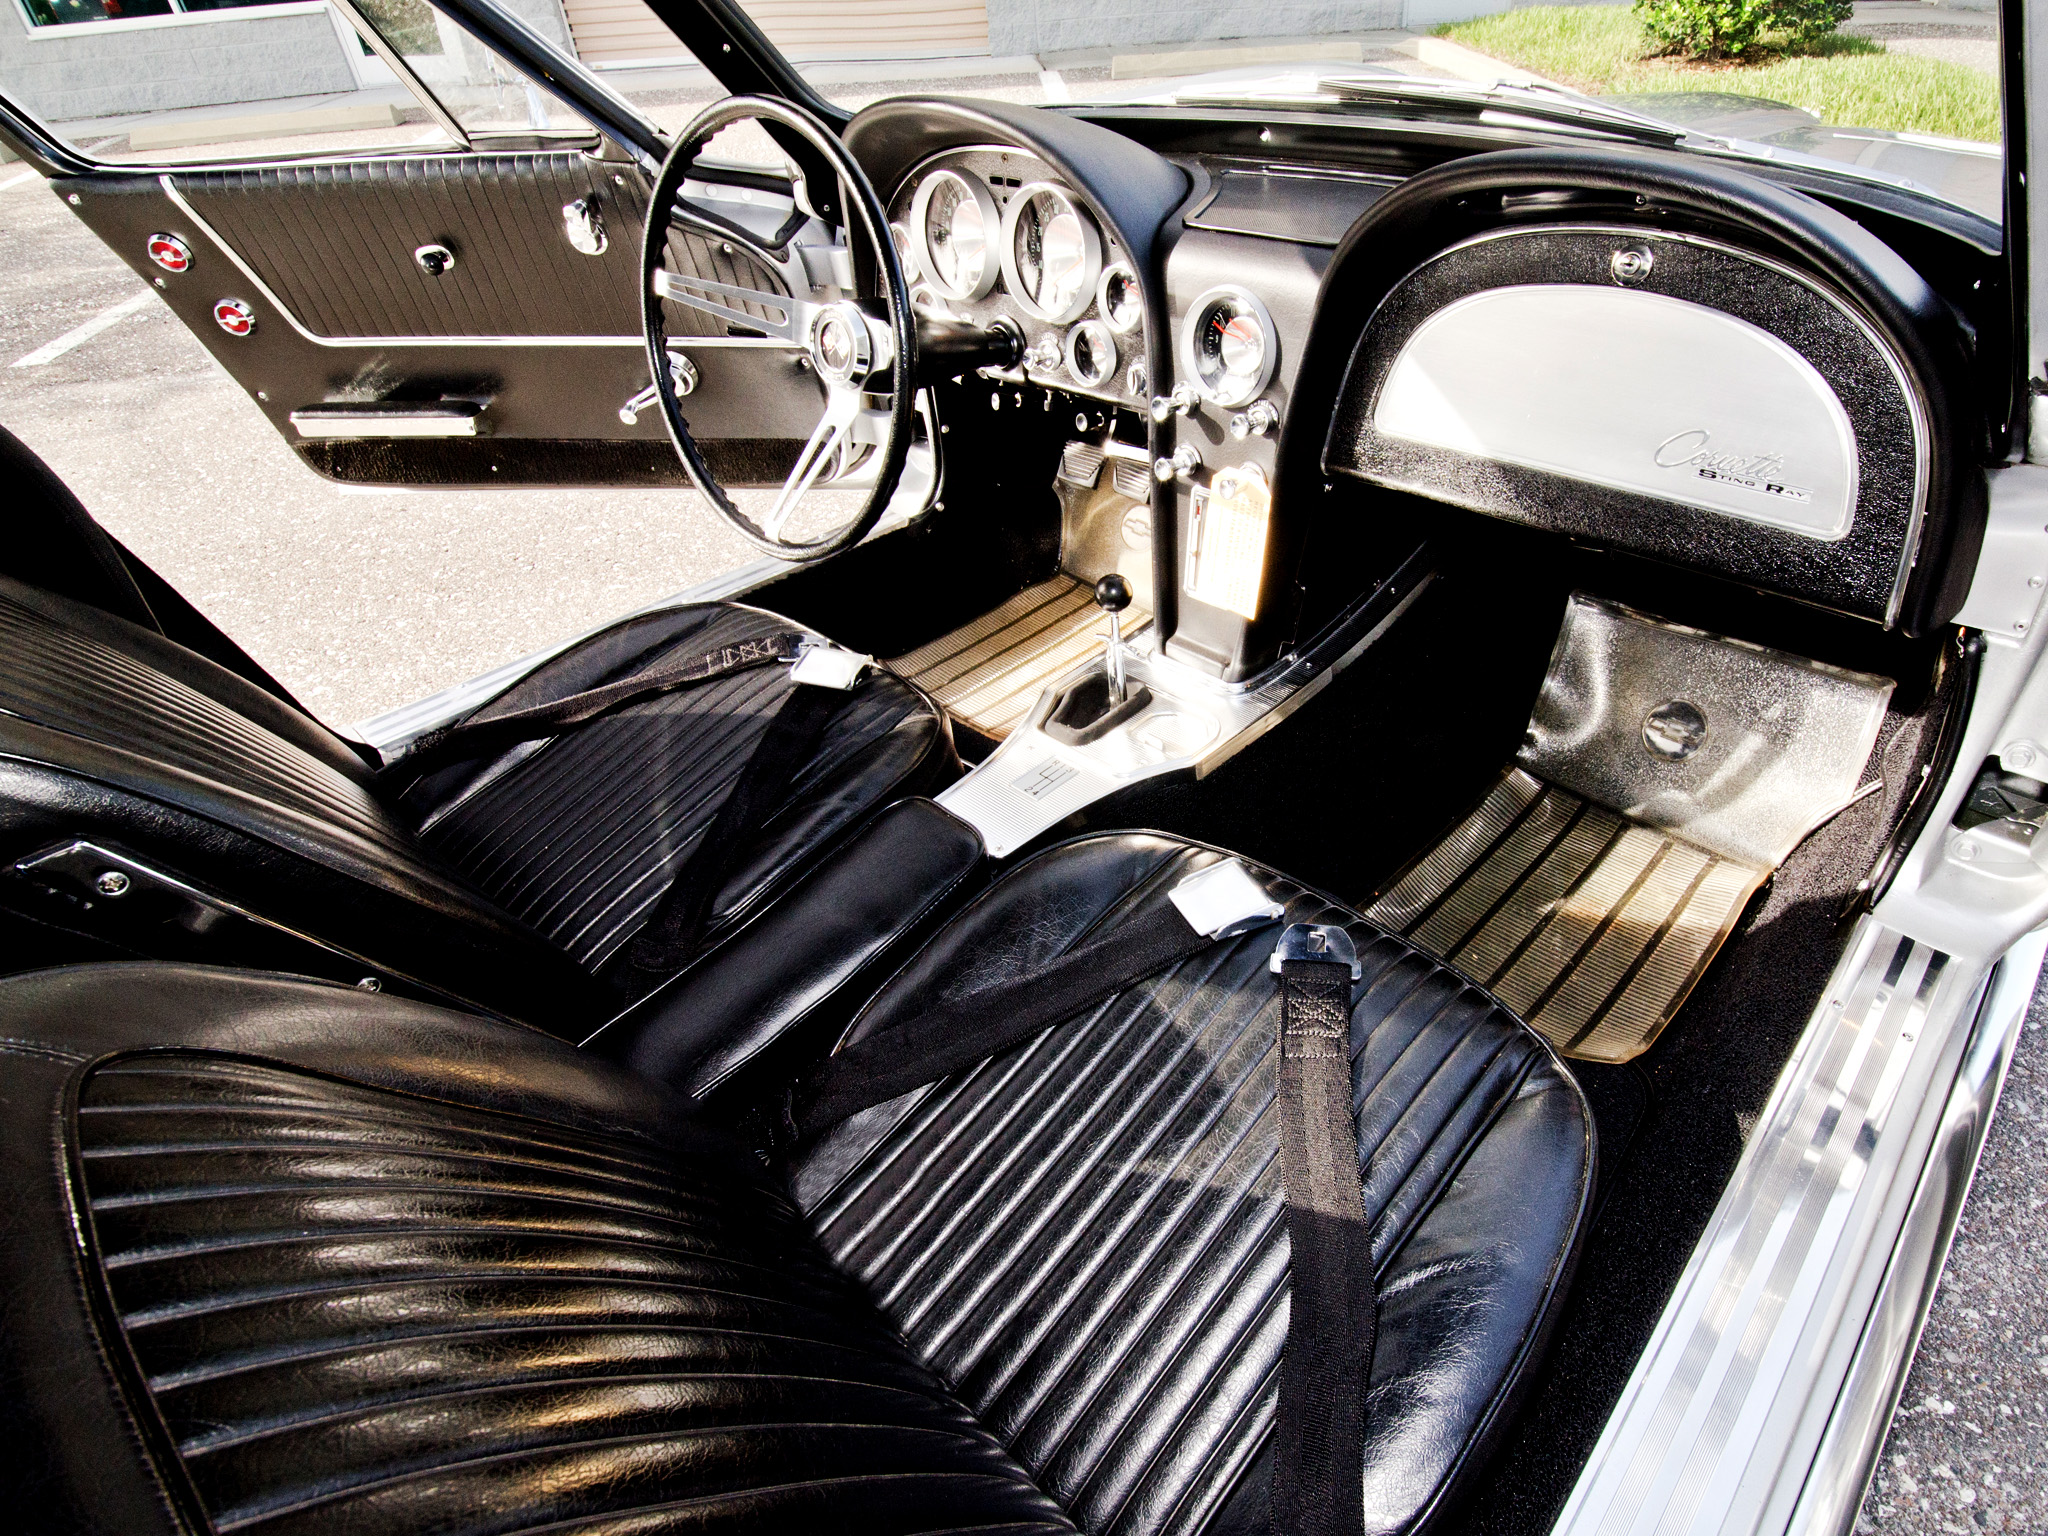 1963, Chevrolet, Corvette, Sting, Ray, L84, 327, Fuel, Injection, C 2, Supercar, Muscle, Classic, Interior Wallpaper